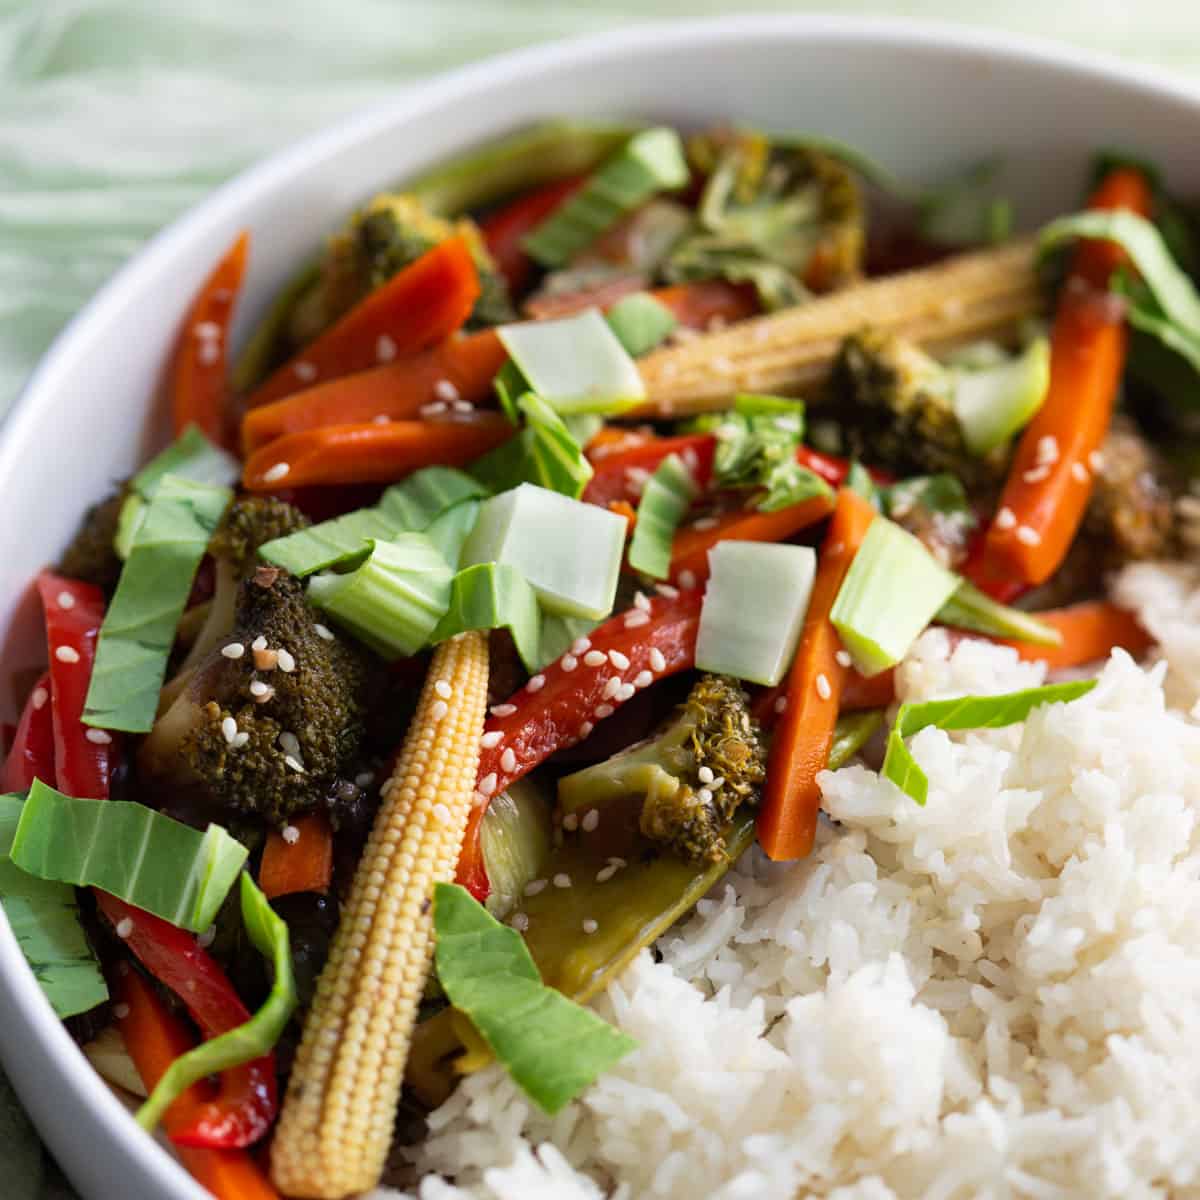 Vegan Stir-Fry served with white rice in a white bowl.
